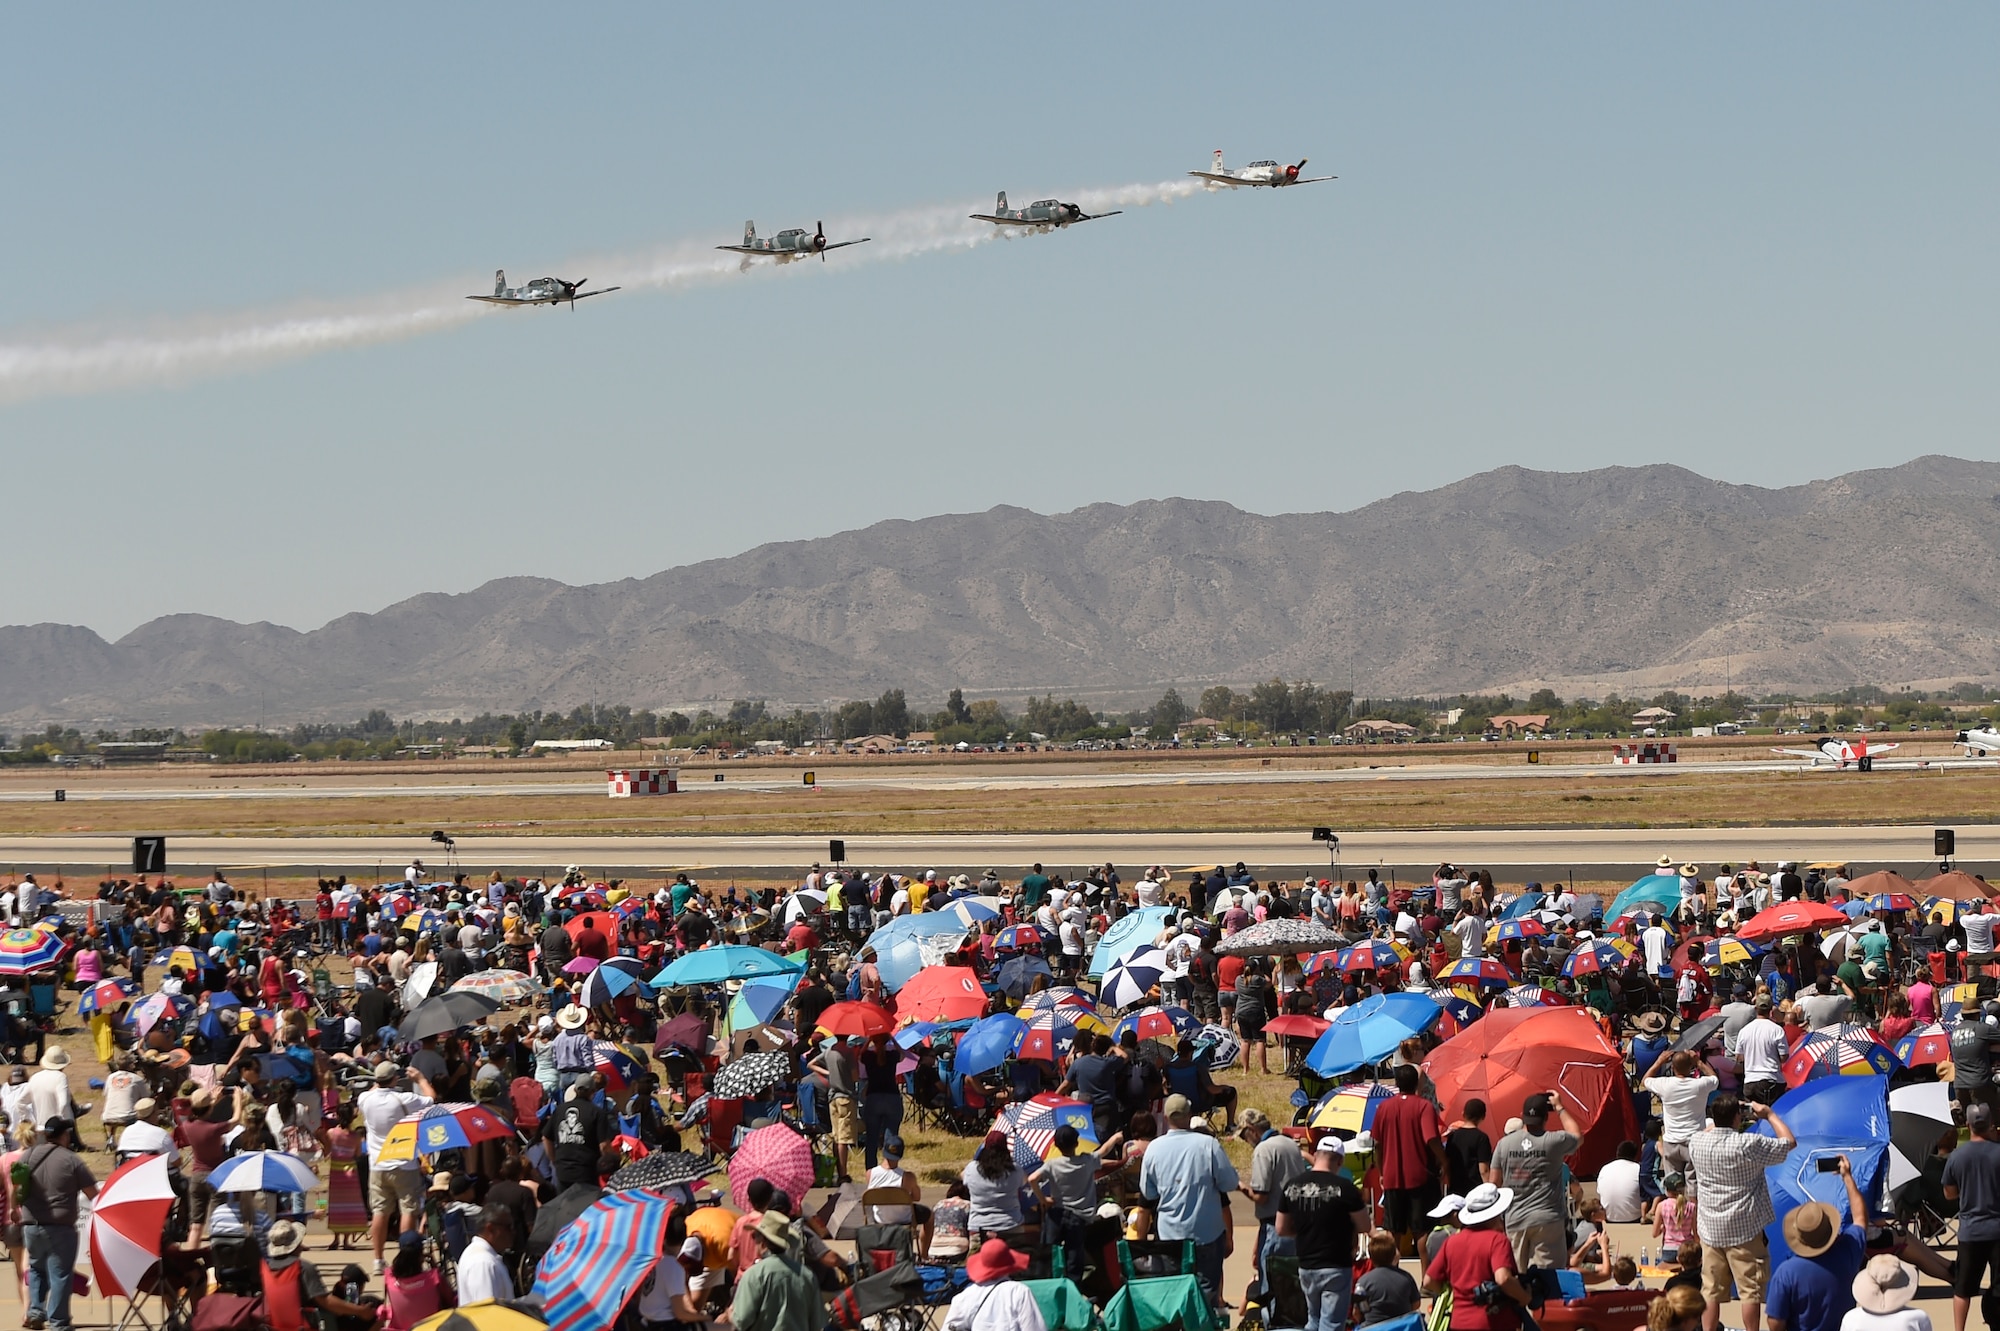 Members of the Desert Rats aerial demonstration team fly over the flight line at Luke Air Force Base during the 75 Years of Airpower air show Apr. 3, 2016.  (U.S. Air Force photo by Staff Sgt Staci Miller)